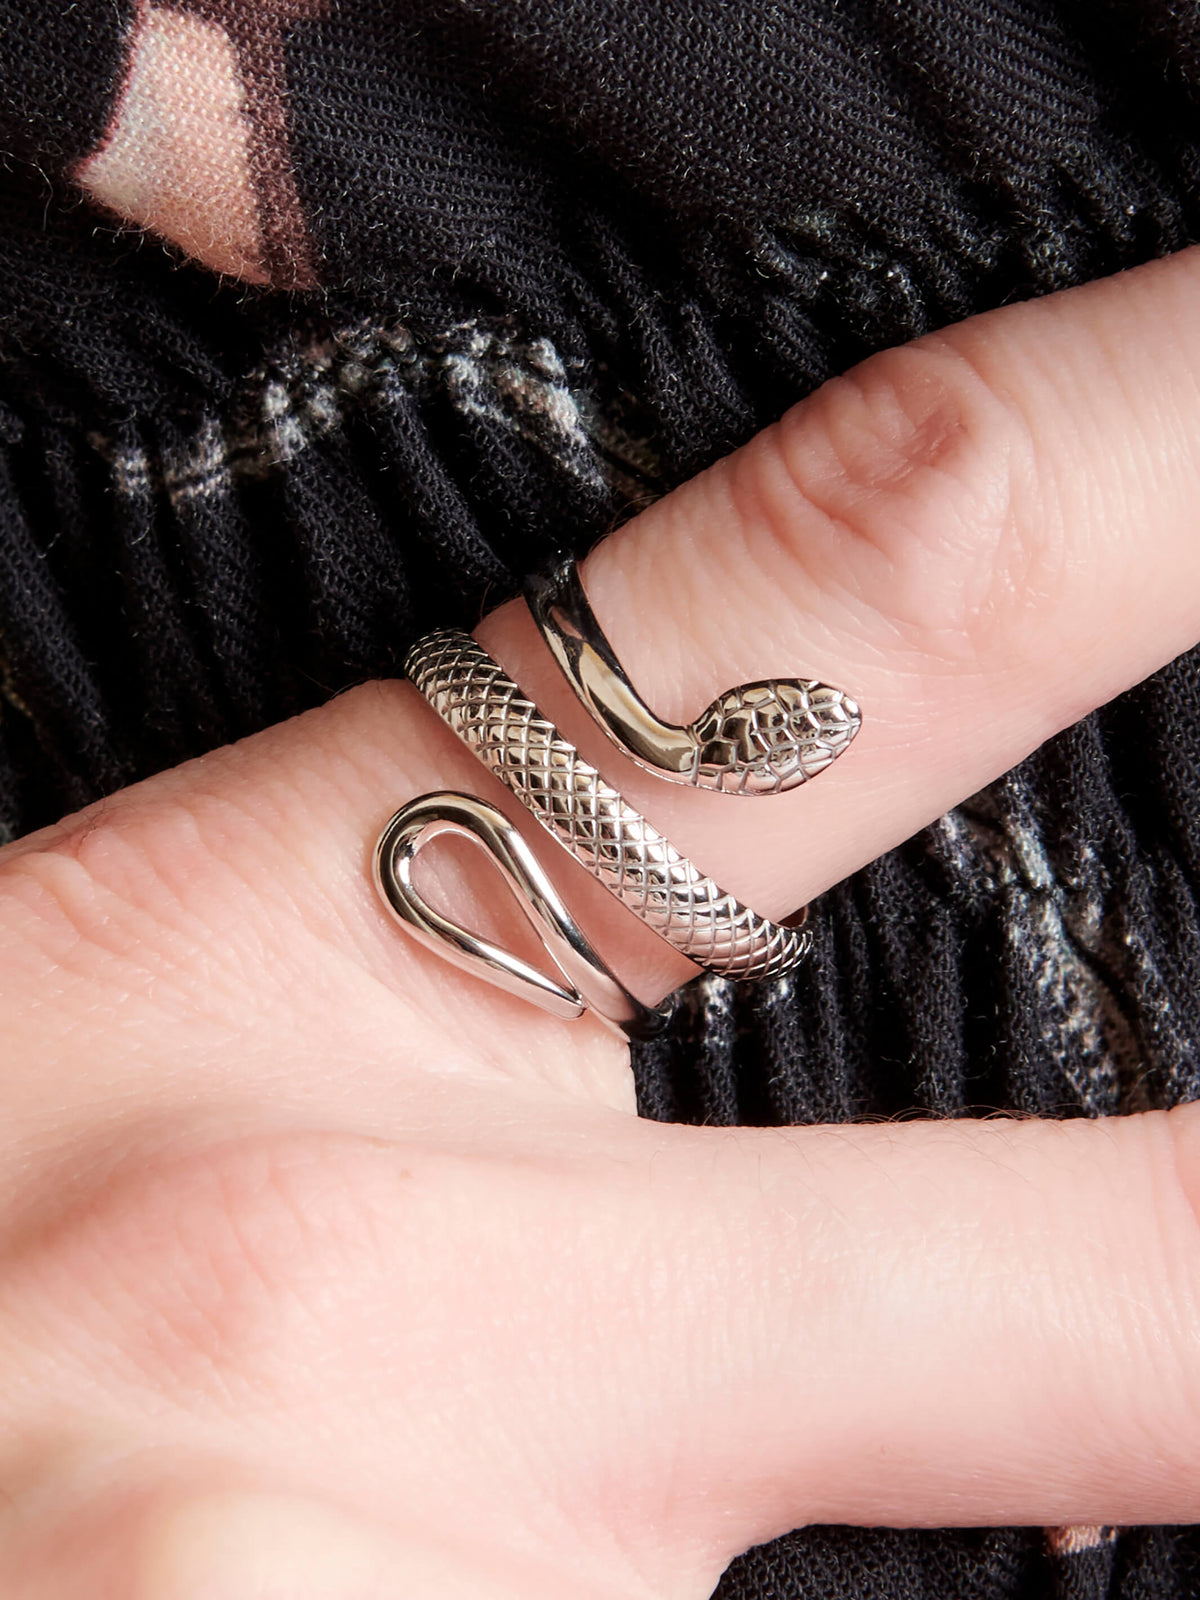 Silver snake wrapping around finger